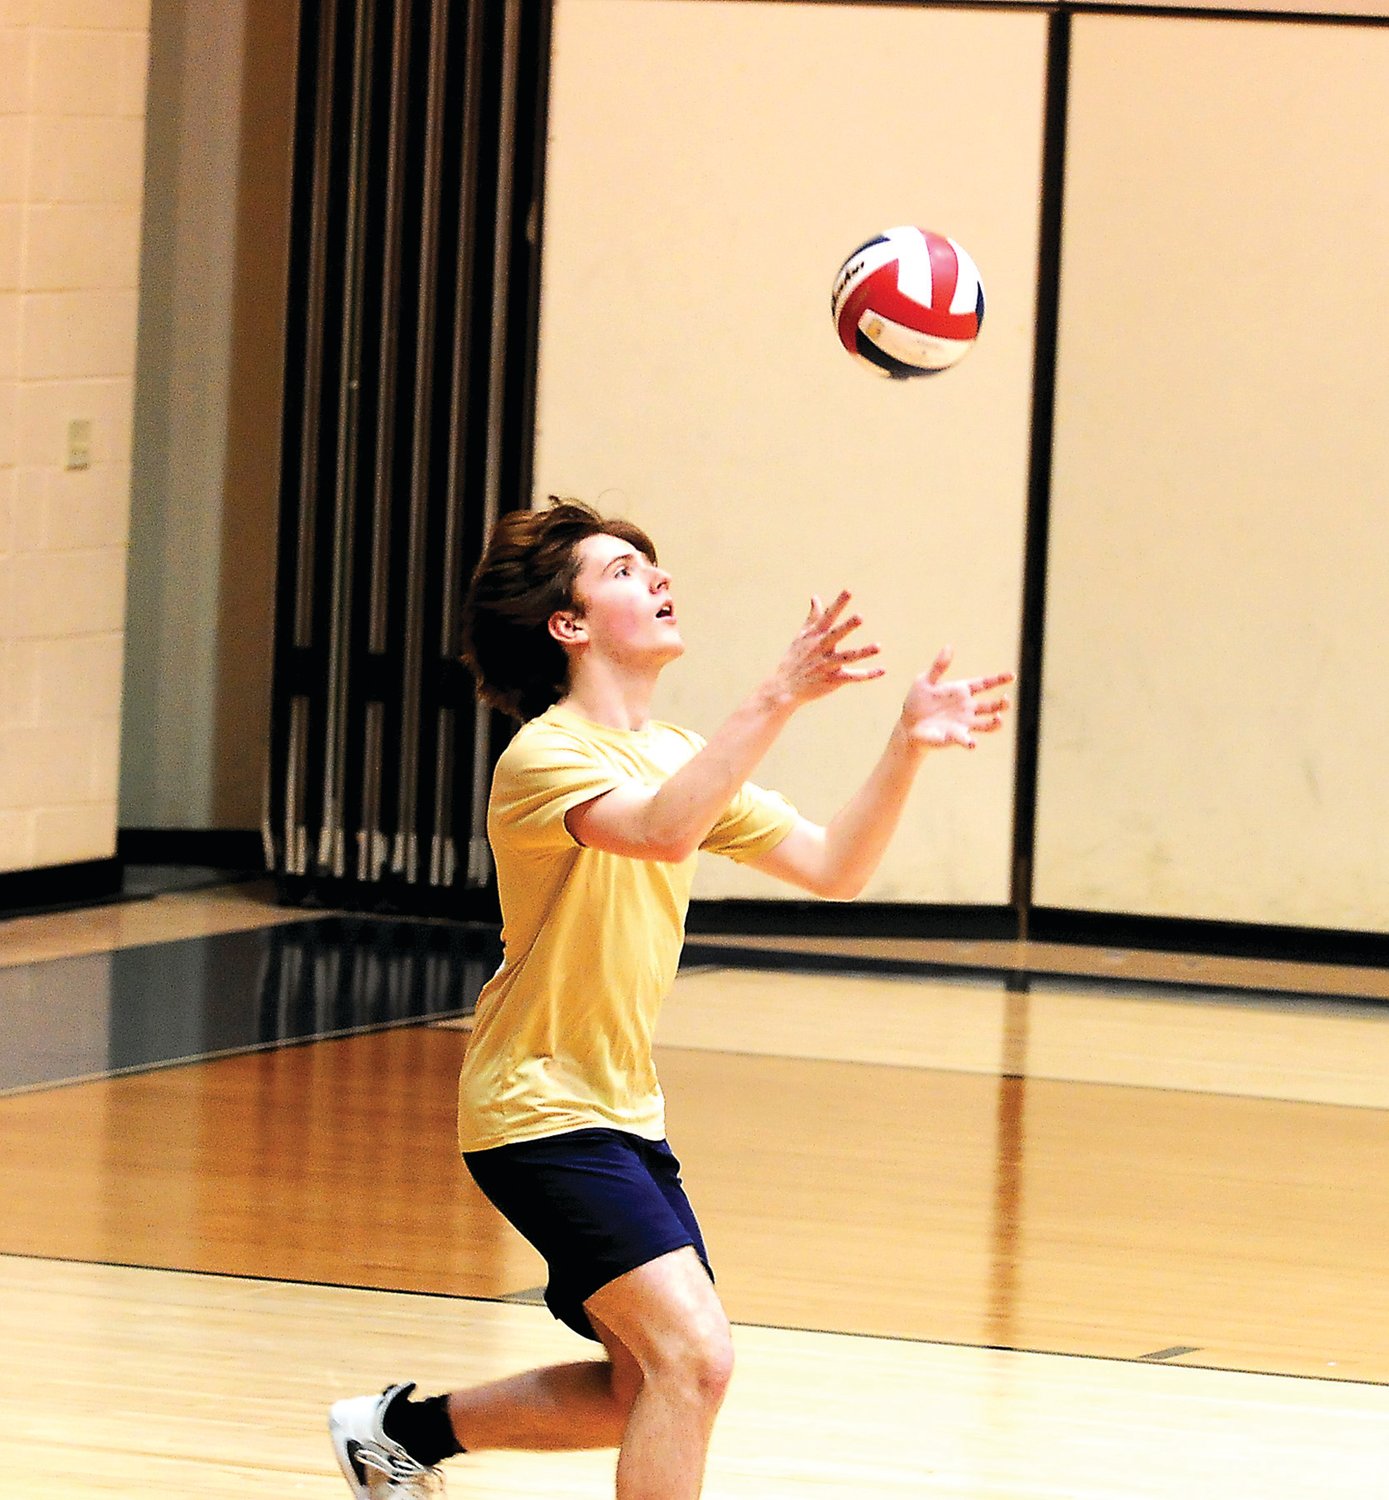 Tommy Fabrizio, a first-year varsity player for Council Rock South, serves the ball up for the Golden Hawks in North's 3-0 victory over South March 23 on the Golden Hawks' home court.